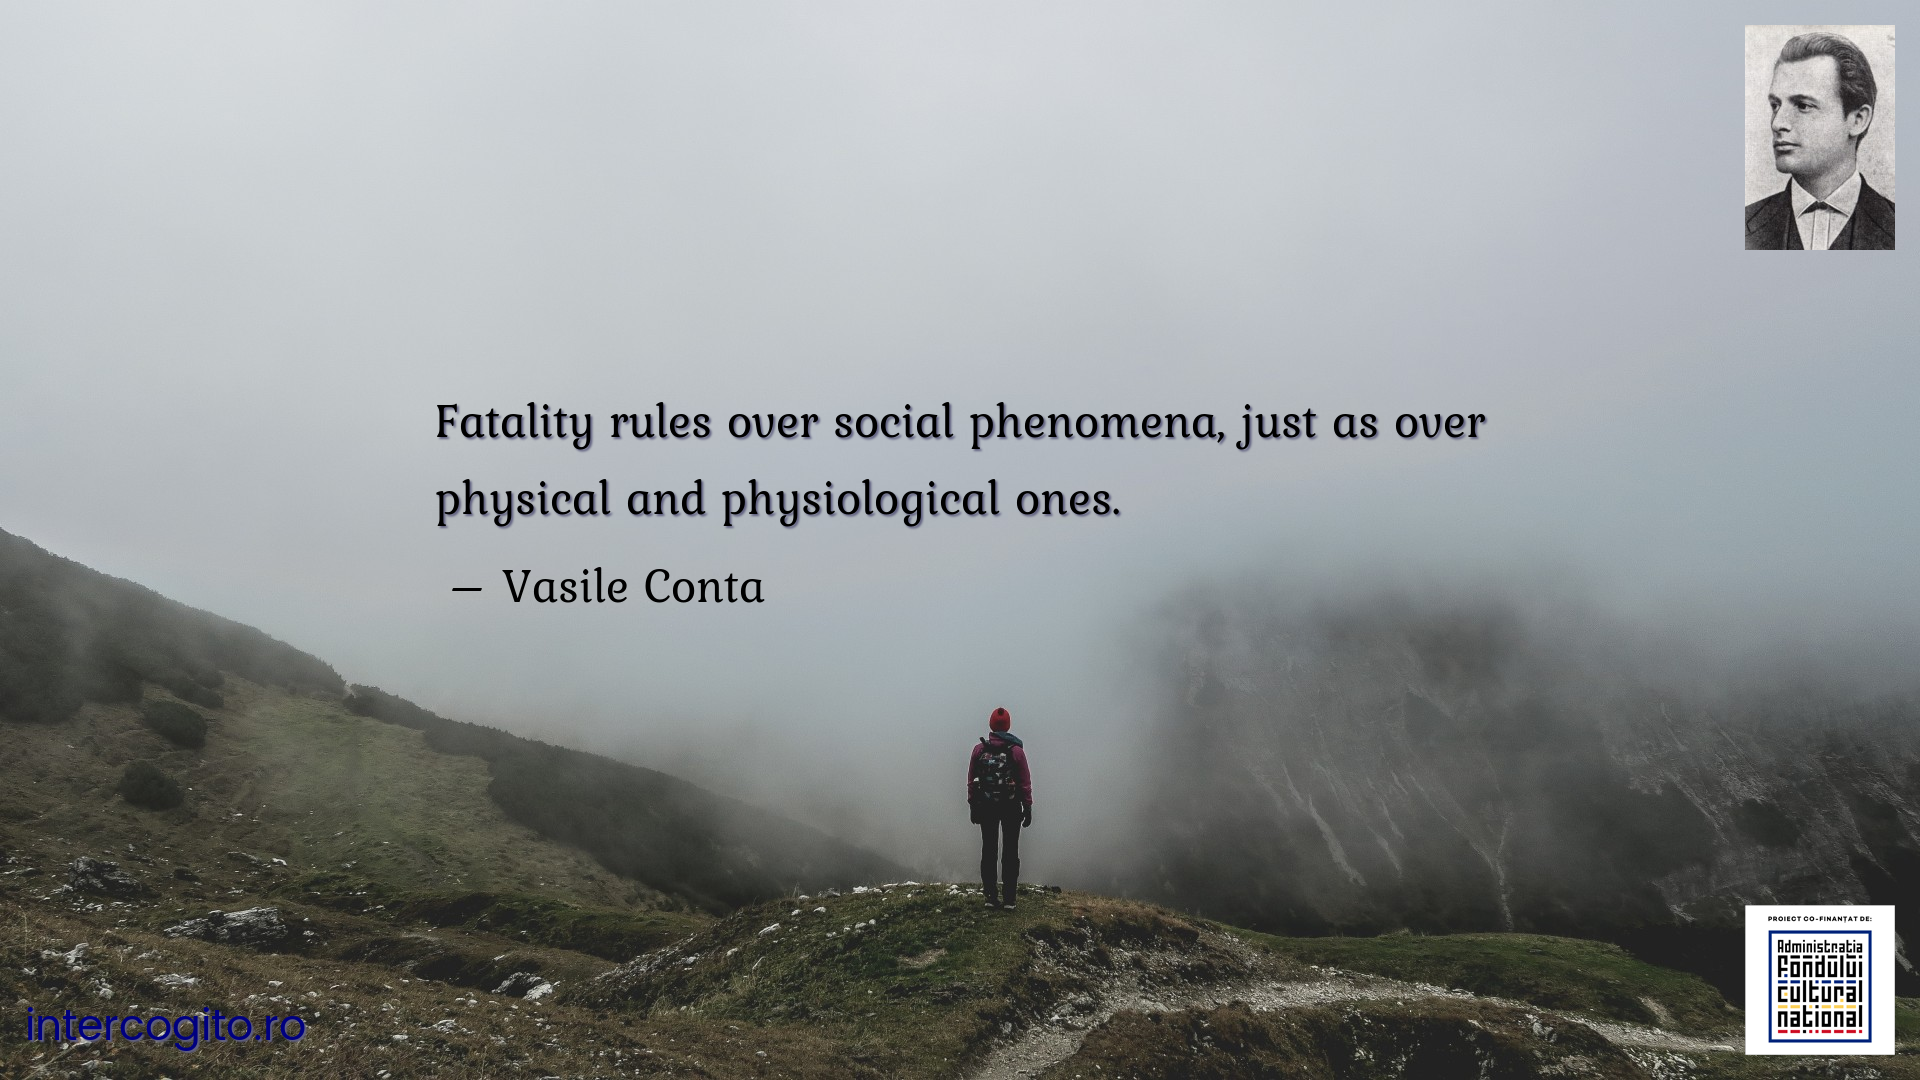 Fatality rules over social phenomena, just as over physical and physiological ones.